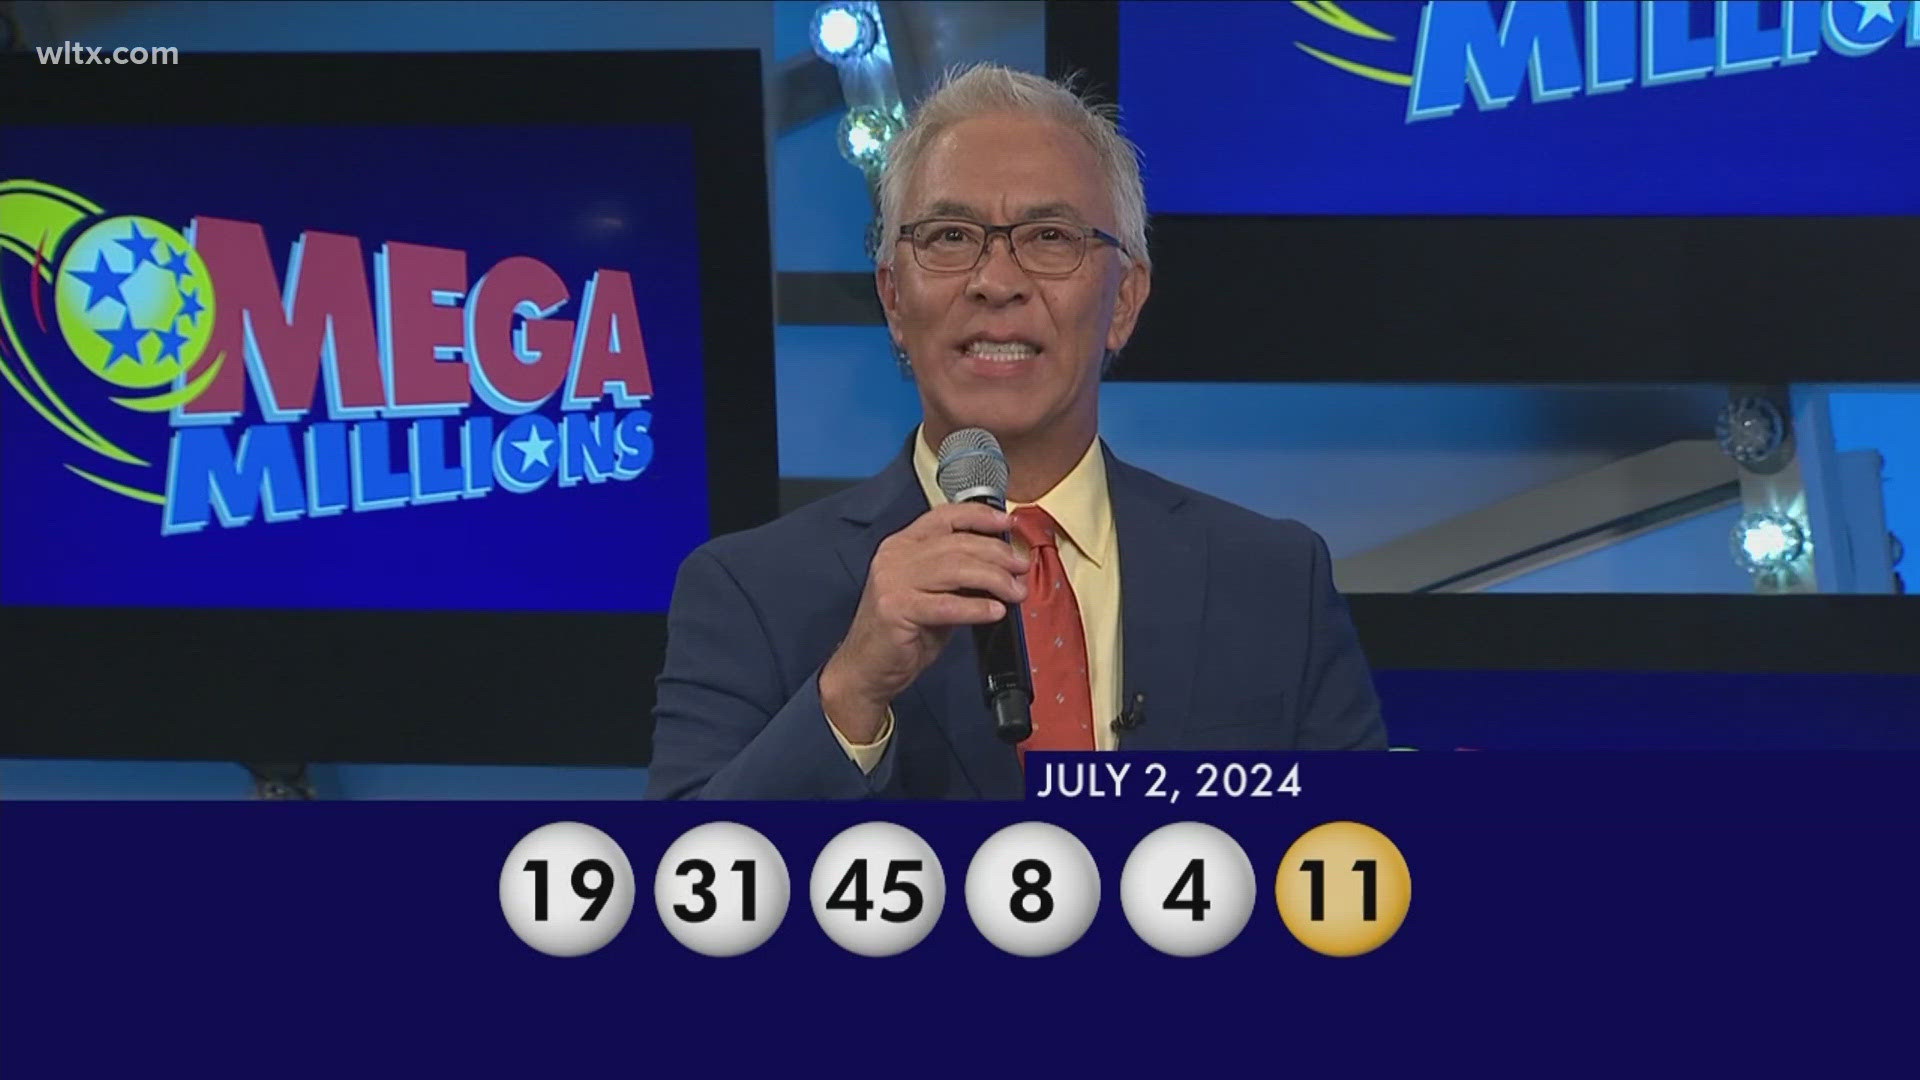 Here are the winning MegaMillions numbers for July 2, 2024.